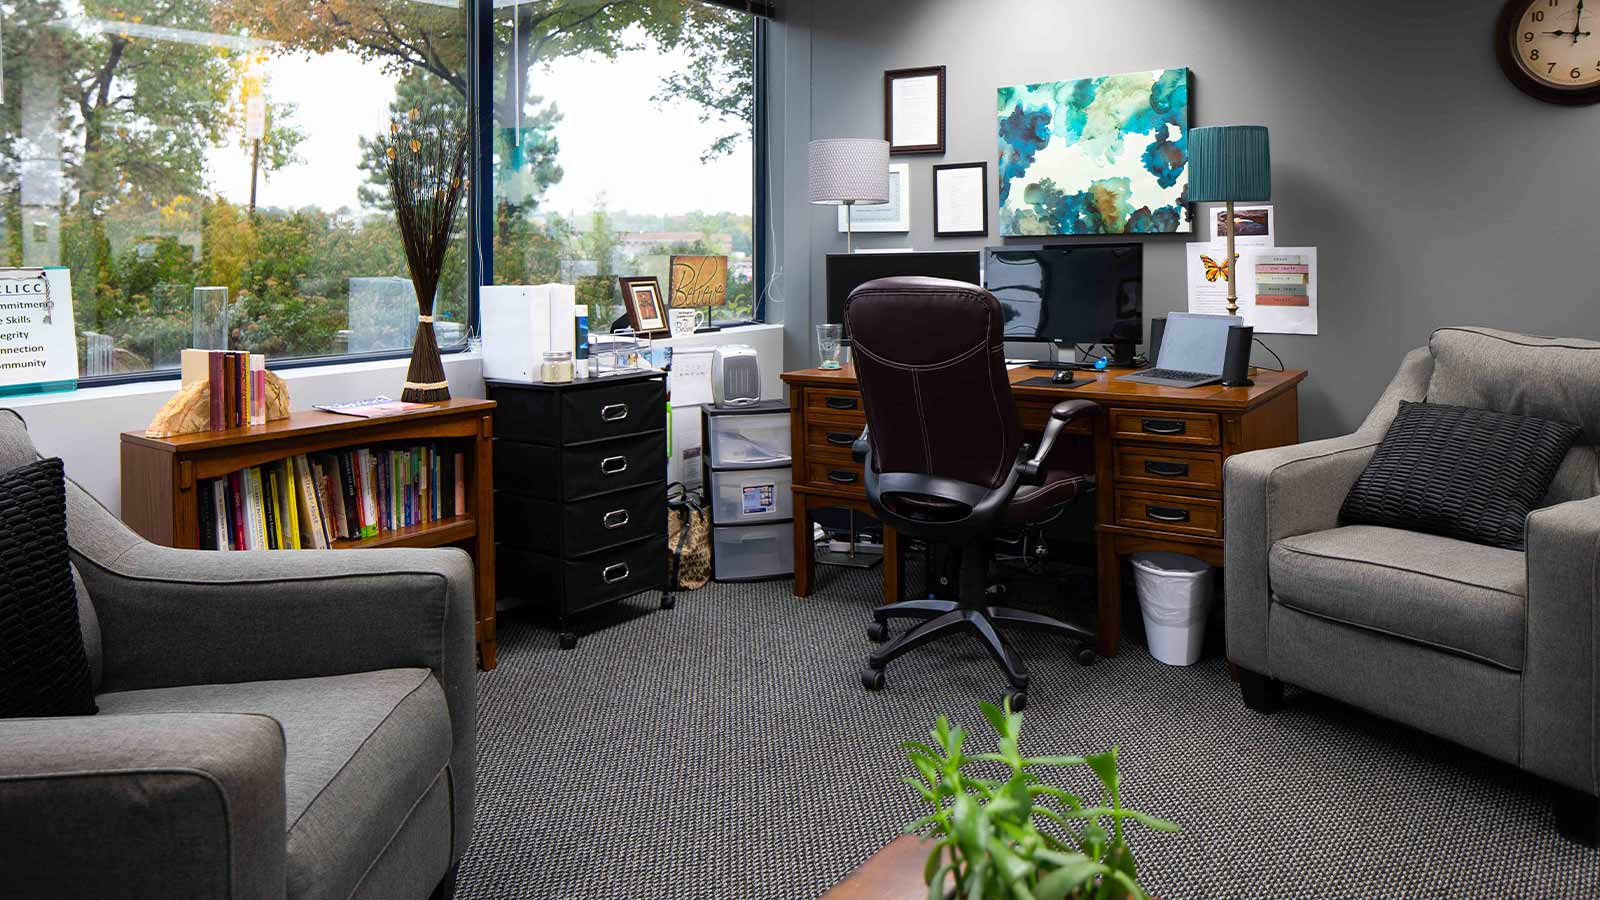 Cozy office environment with bookshelf, comfortable seating, and a warm decorative style.